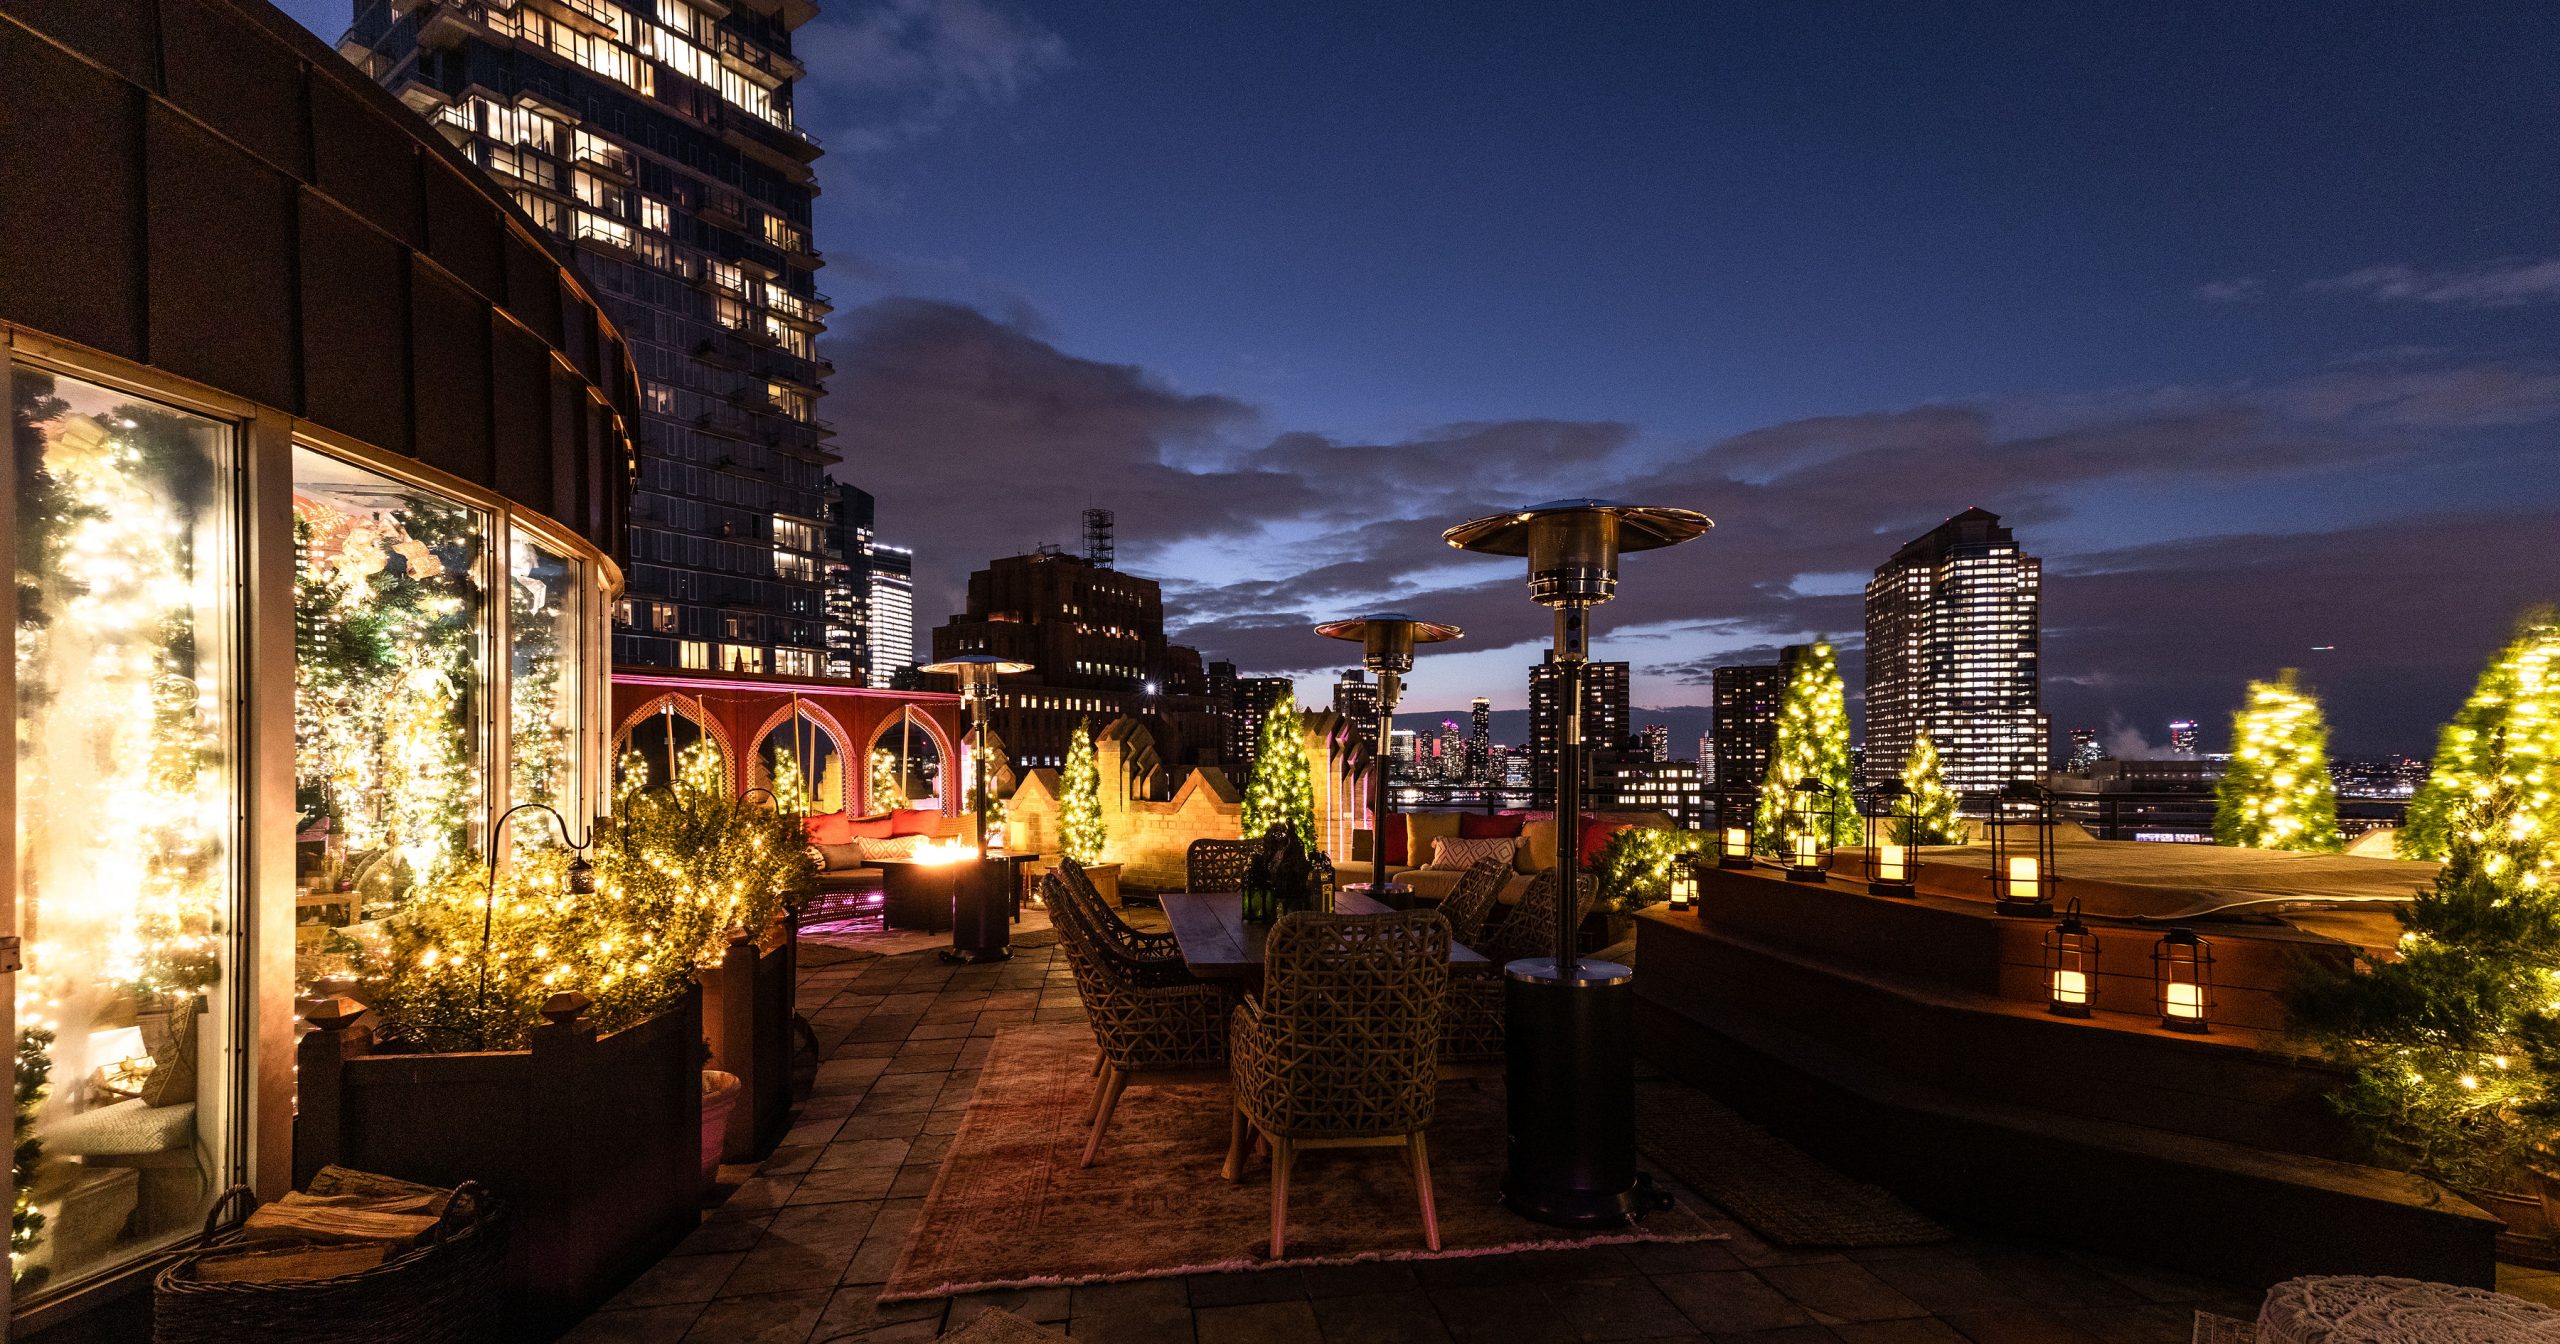 Ux Rooftop Terrace At Mariah Carey's Nyc Penthouse 2 